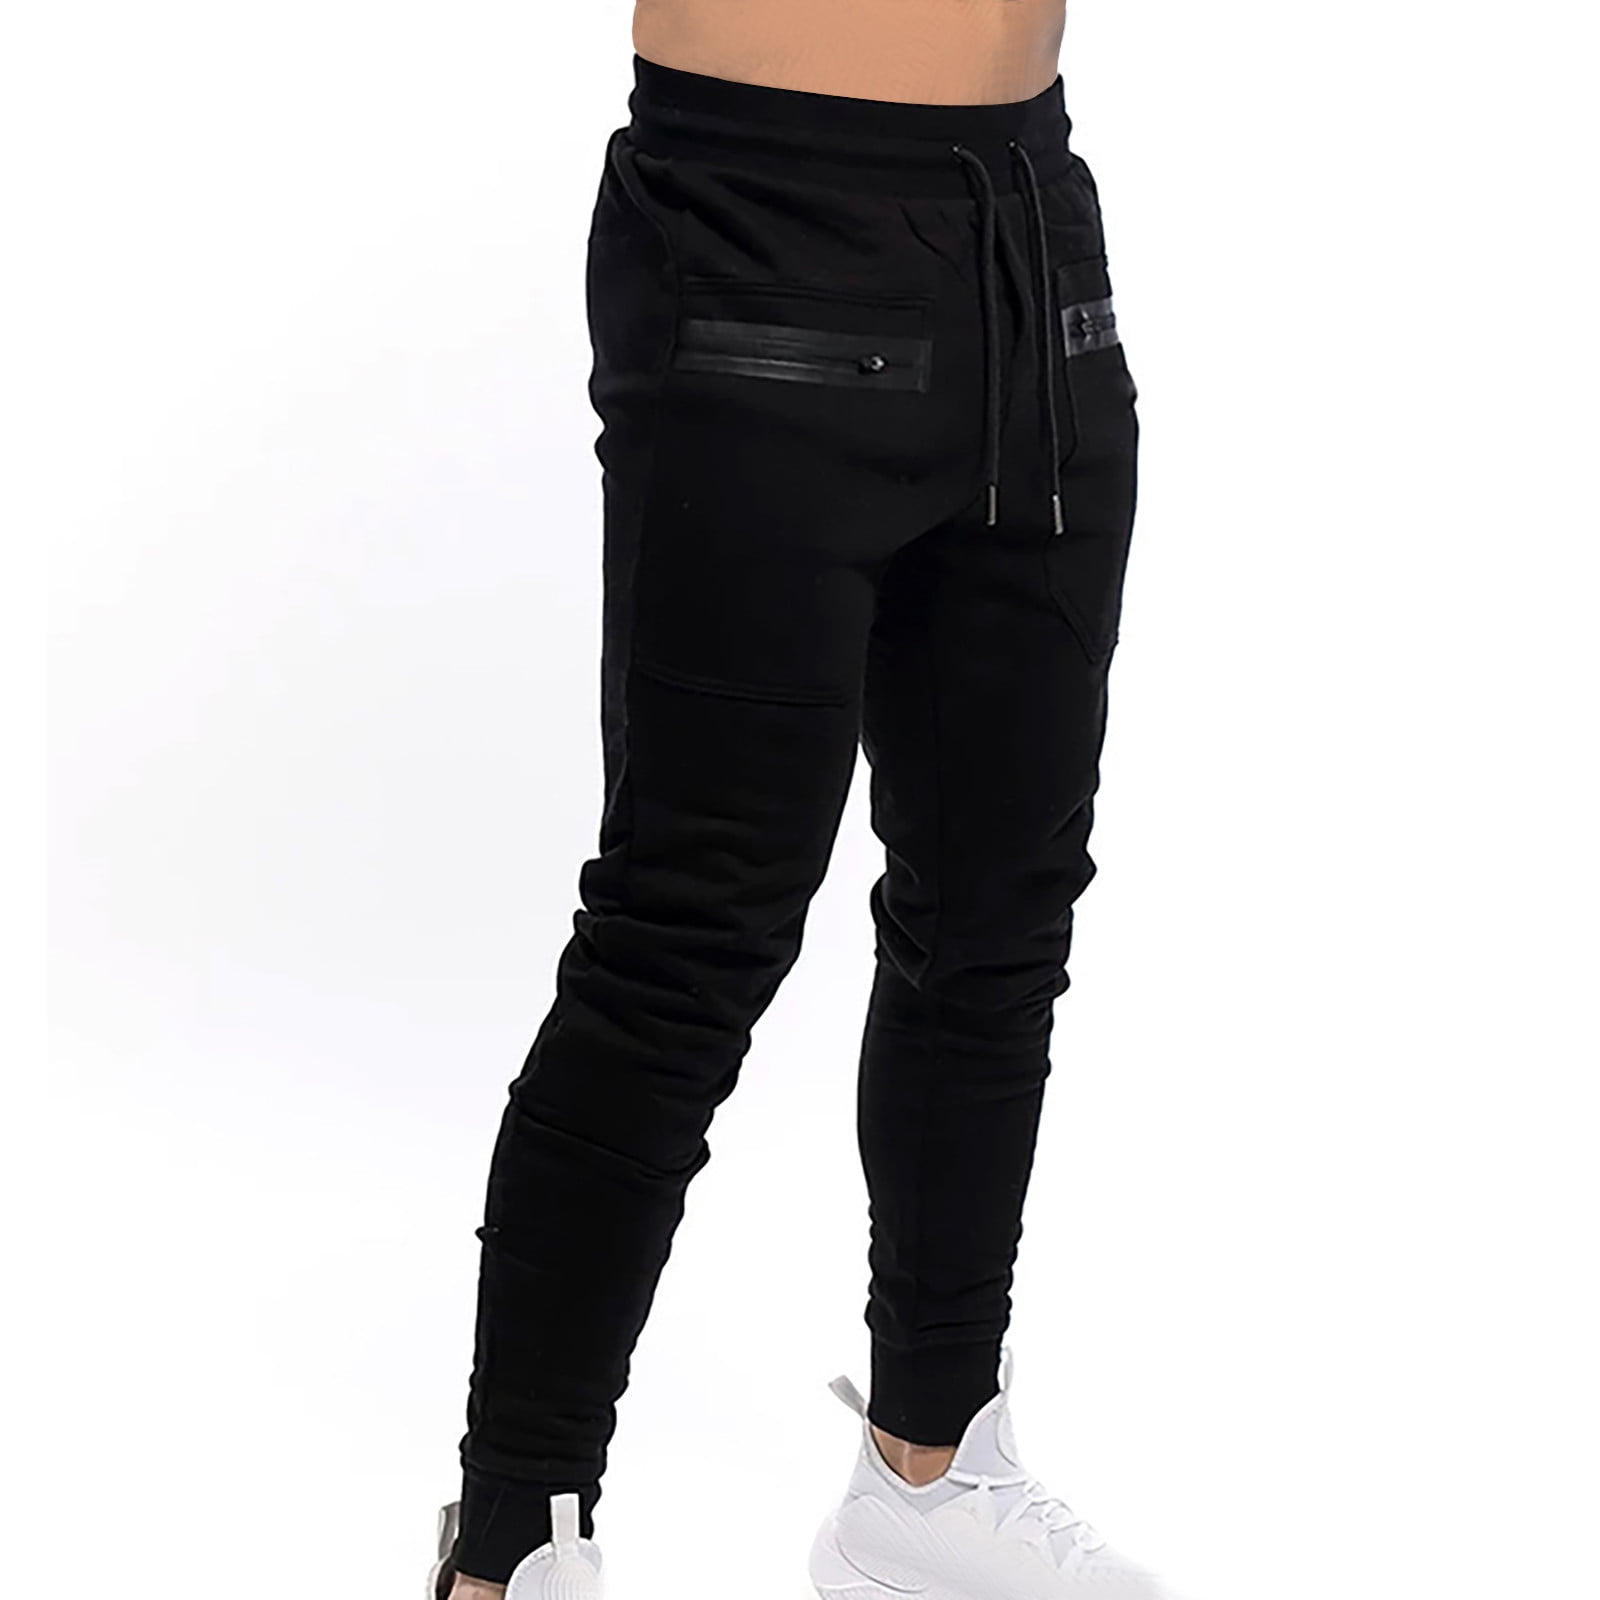  Idtswch 36”Inseam Men's Tall Yoga Sweatpants Open Bottom  Joggers Casual Loose Fit Athletic Pants with Pockets Black : Clothing,  Shoes & Jewelry